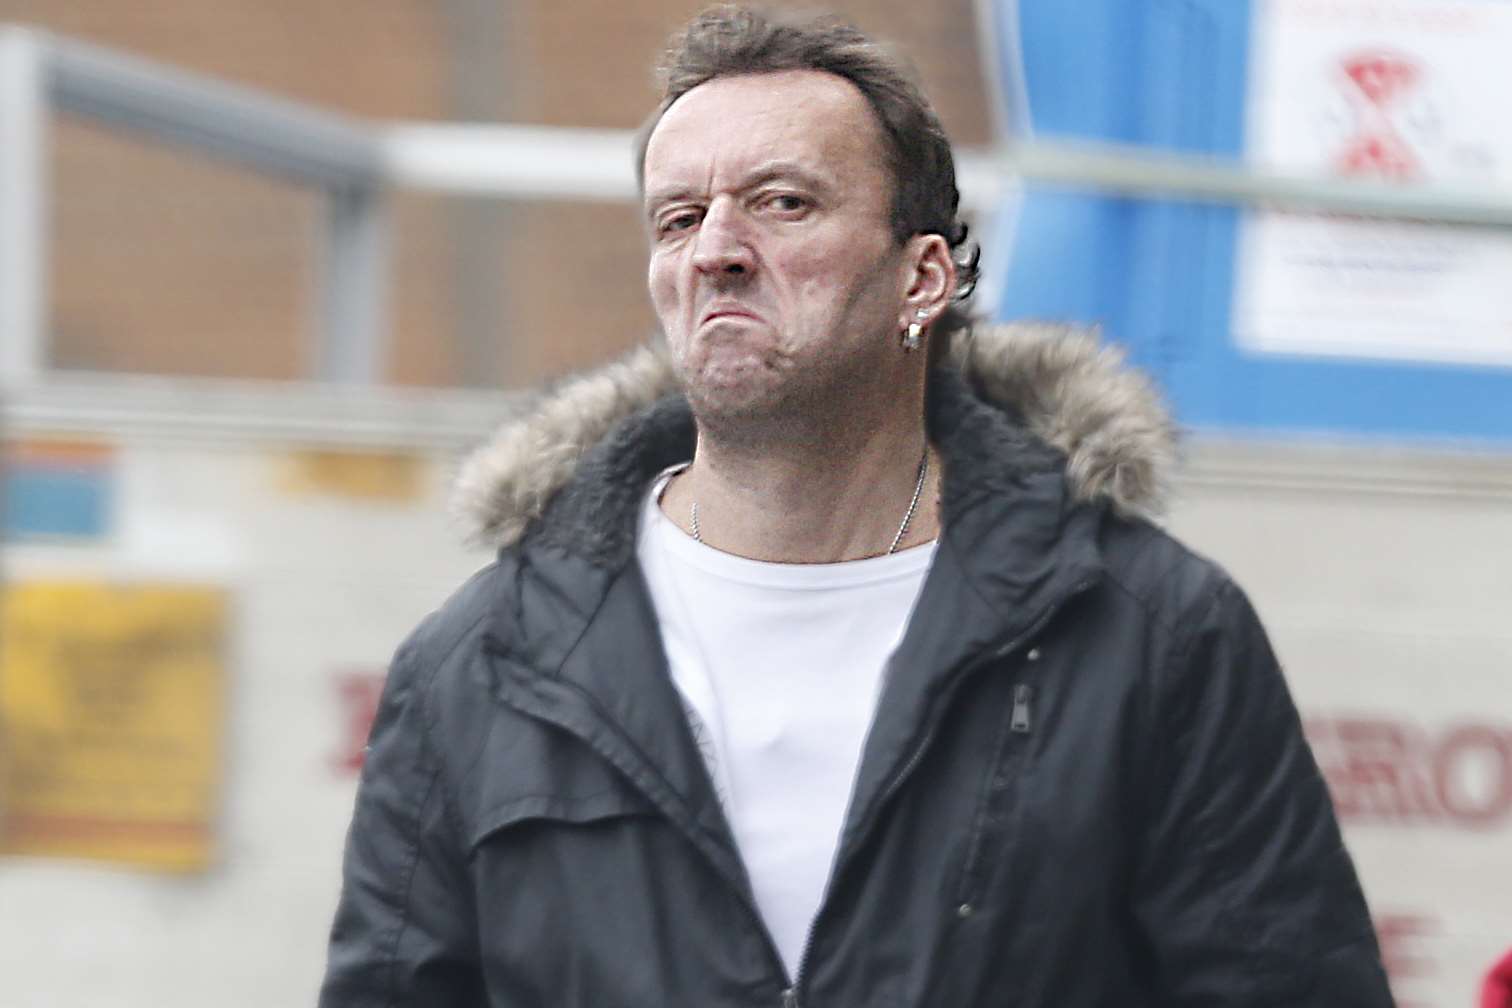 Kevin Kemp admitted stealing from the RSPCA charity shop